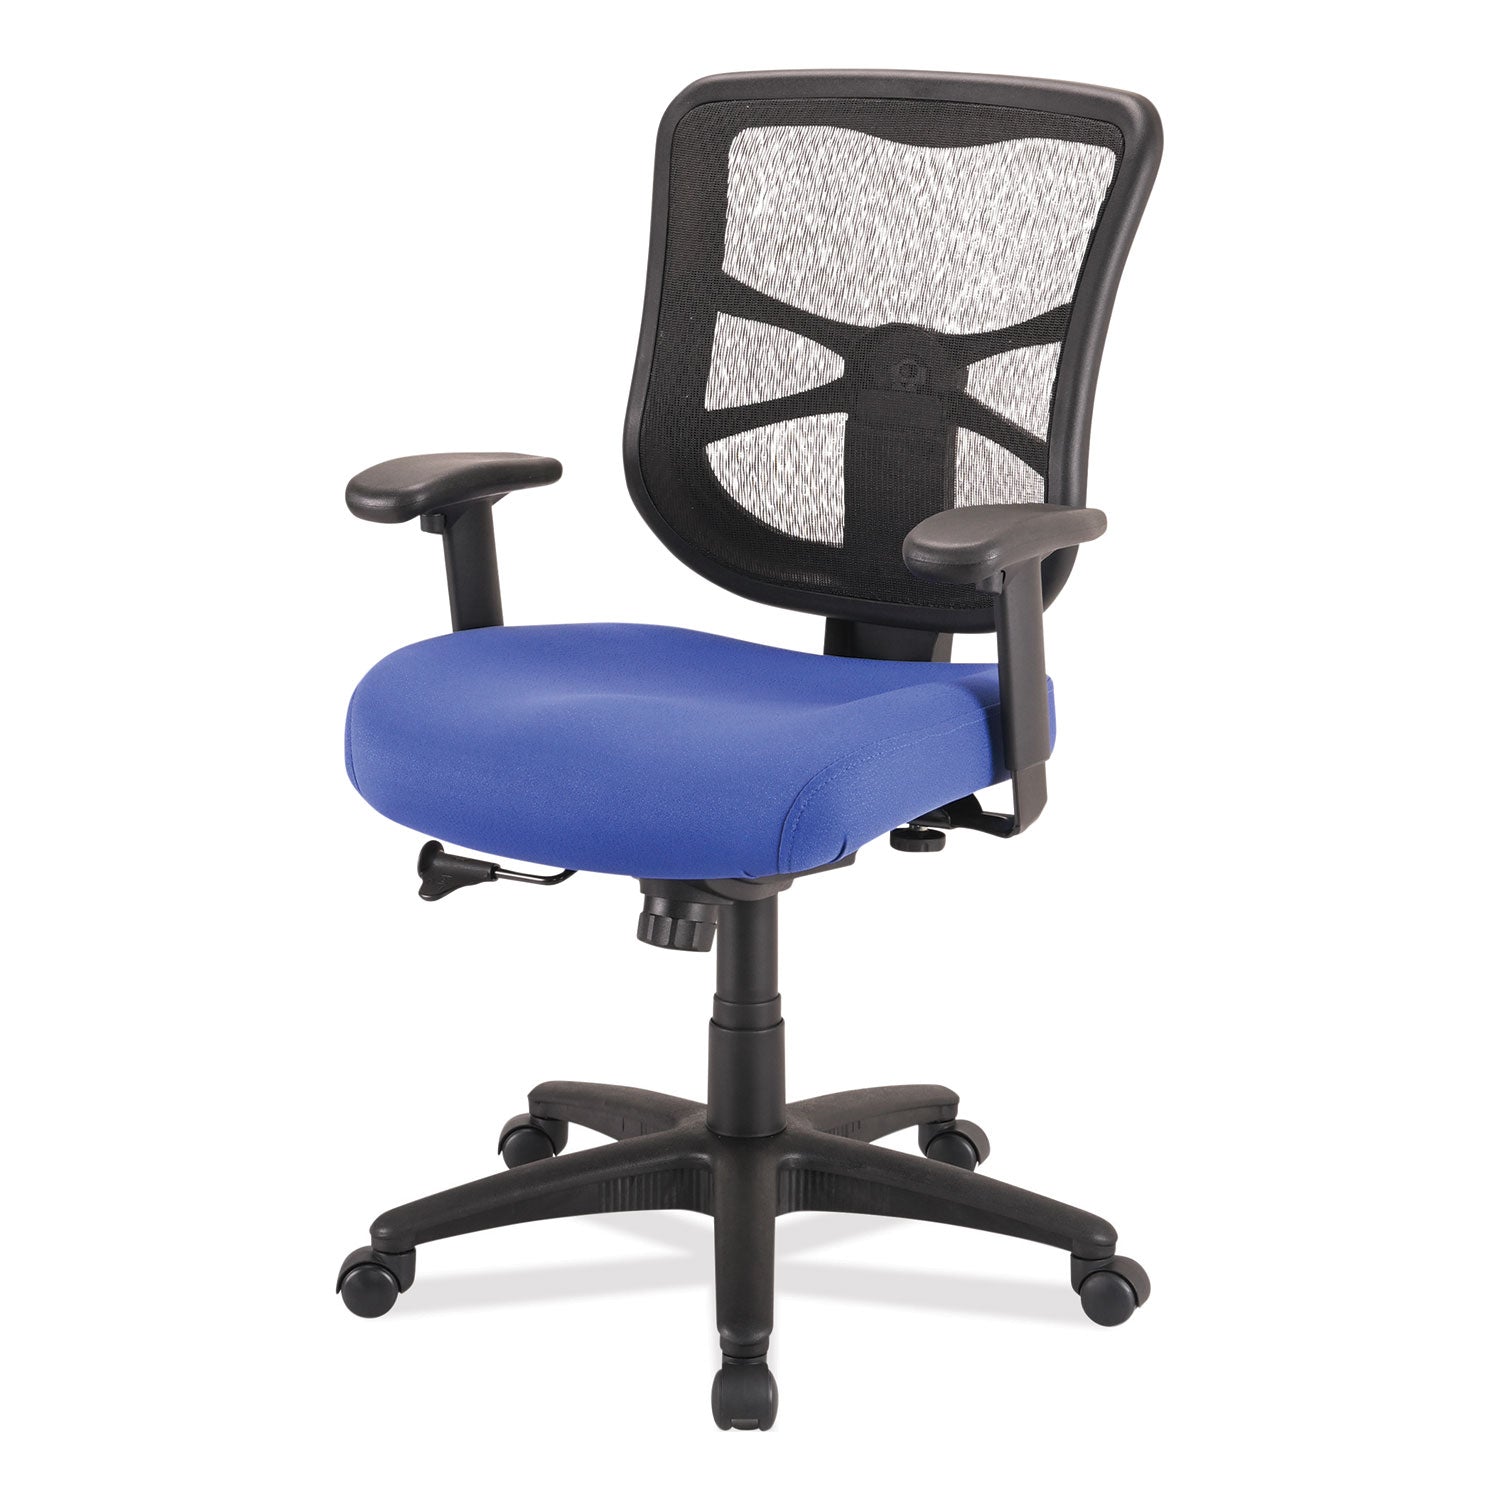 alera-elusion-series-mesh-mid-back-swivel-tilt-chair-supports-up-to-275-lb-179-to-218-seat-height-navy-seat_aleel42bme20b - 2